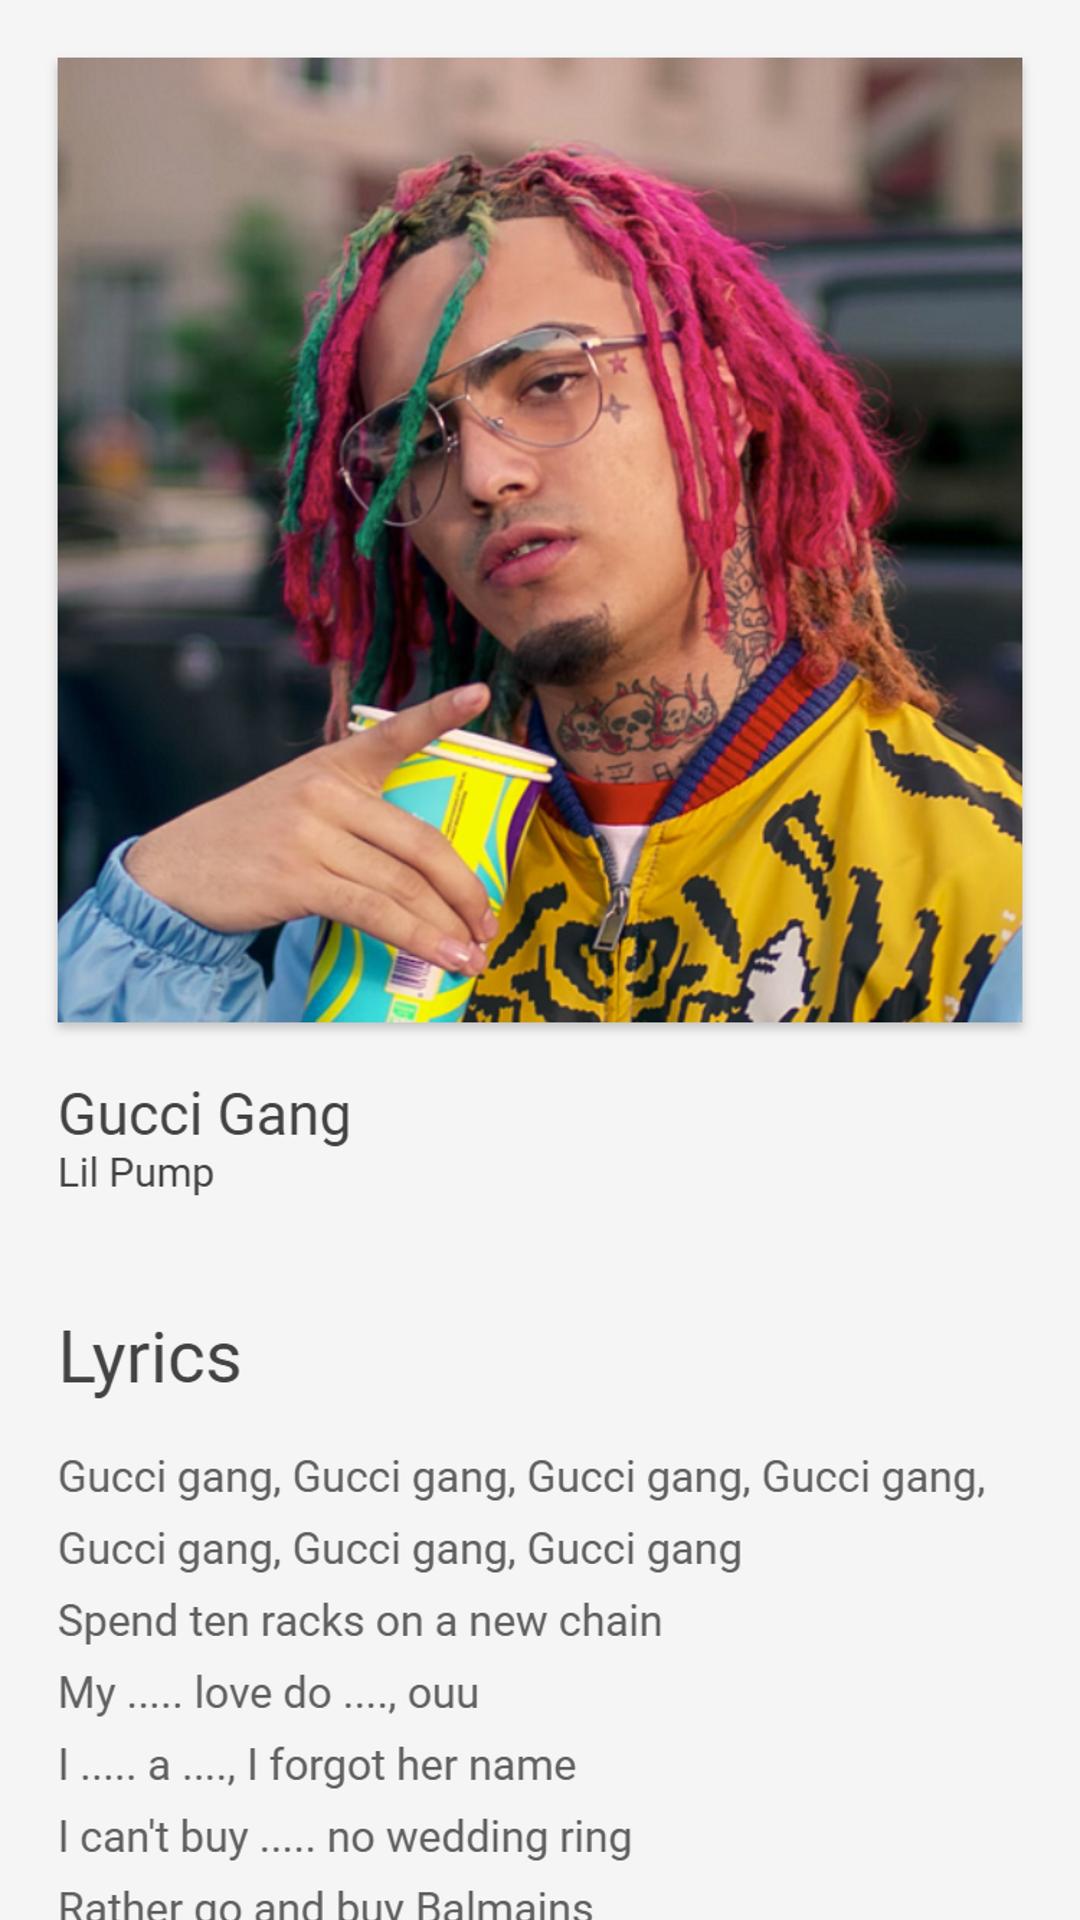 Gucci Gang - Just Lyrics - Lil Pump for Android APK Download